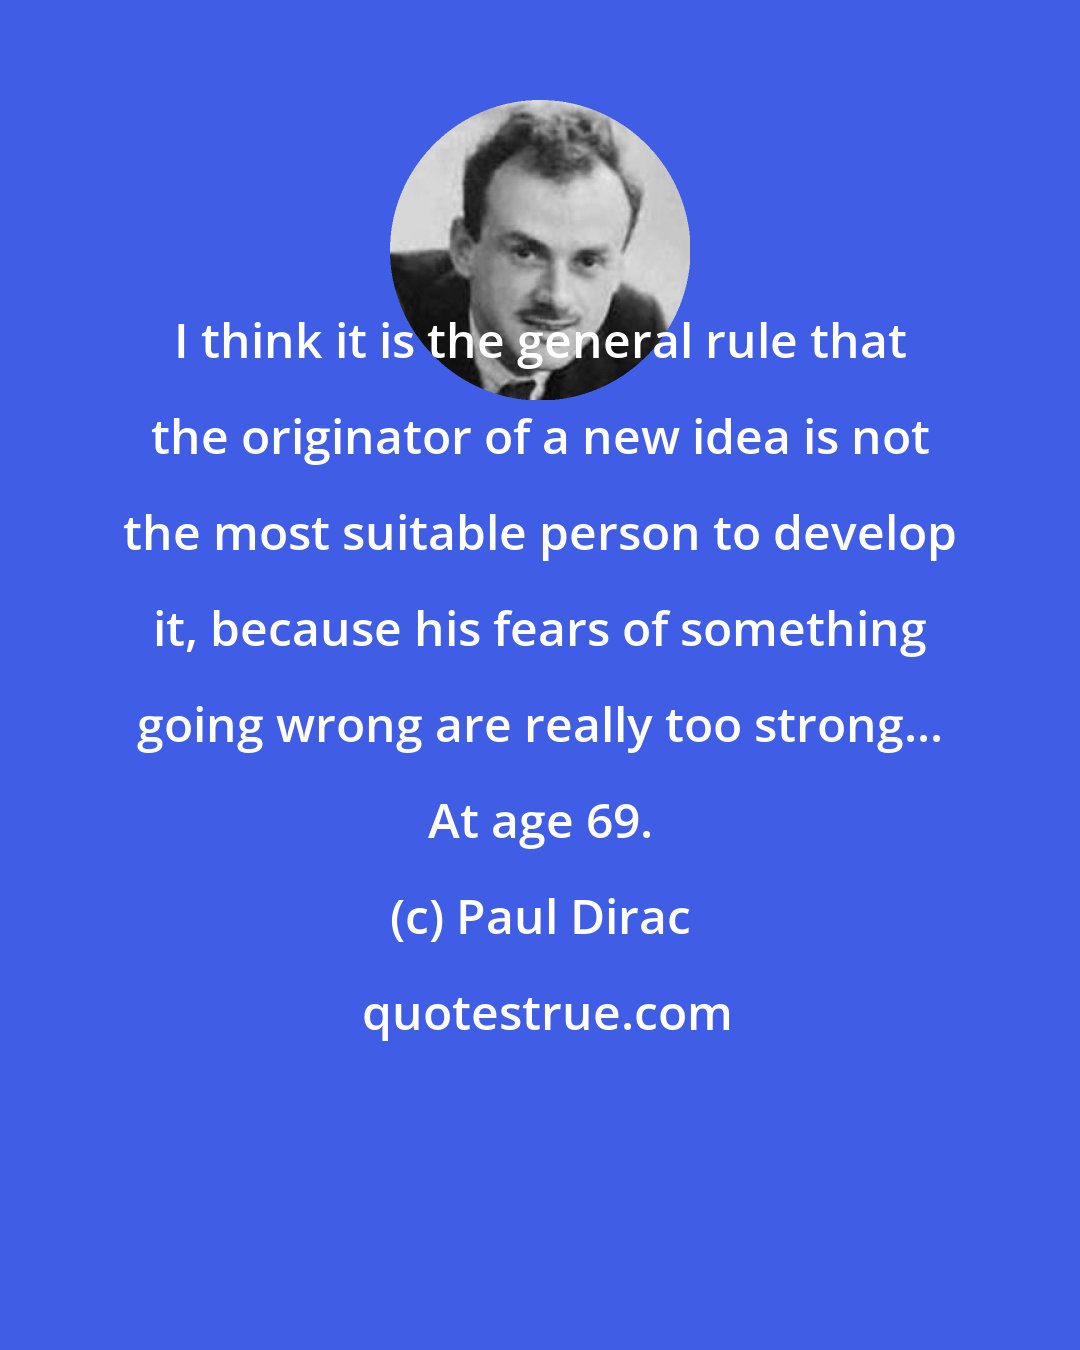 Paul Dirac: I think it is the general rule that the originator of a new idea is not the most suitable person to develop it, because his fears of something going wrong are really too strong... At age 69.